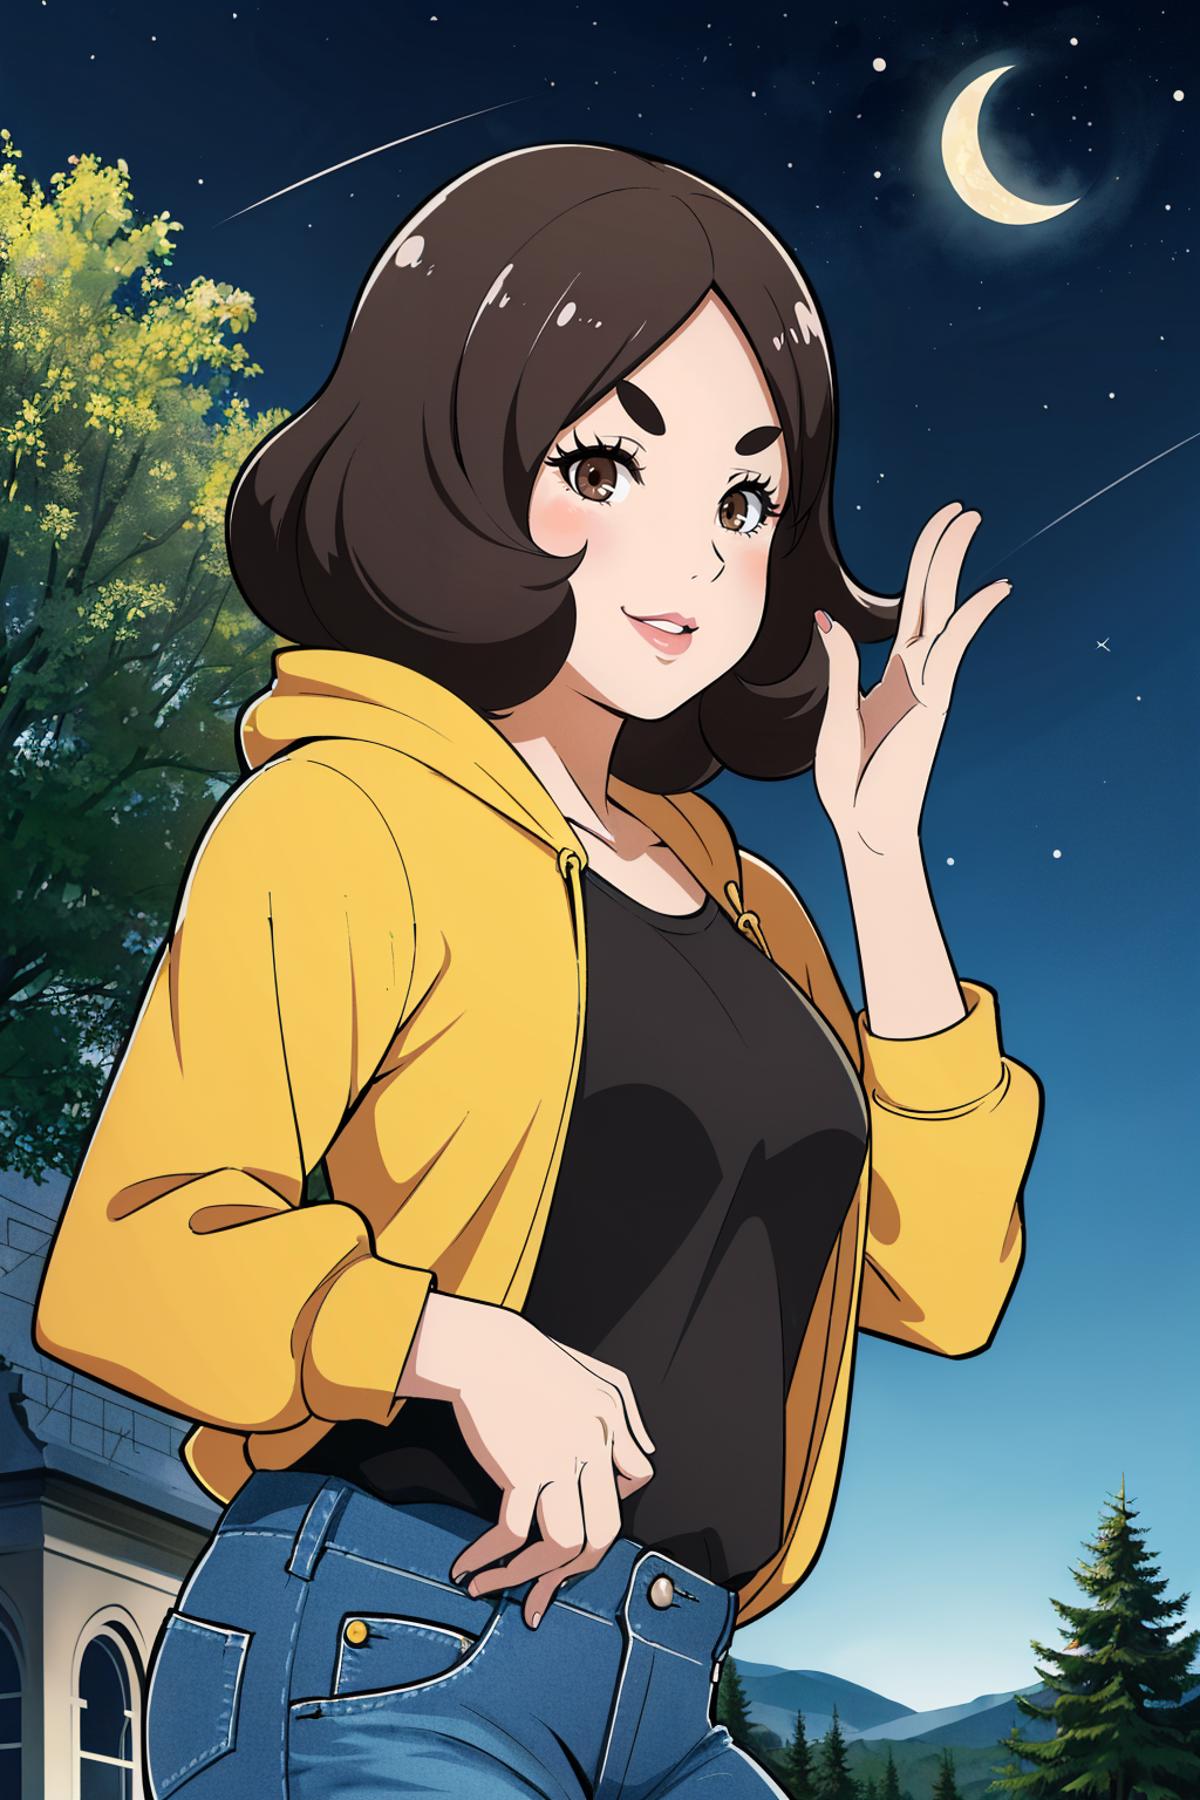 A Cartoon Woman with Brown Hair, Yellow Jacket, and a Black Shirt Posing with Her Hand Up.